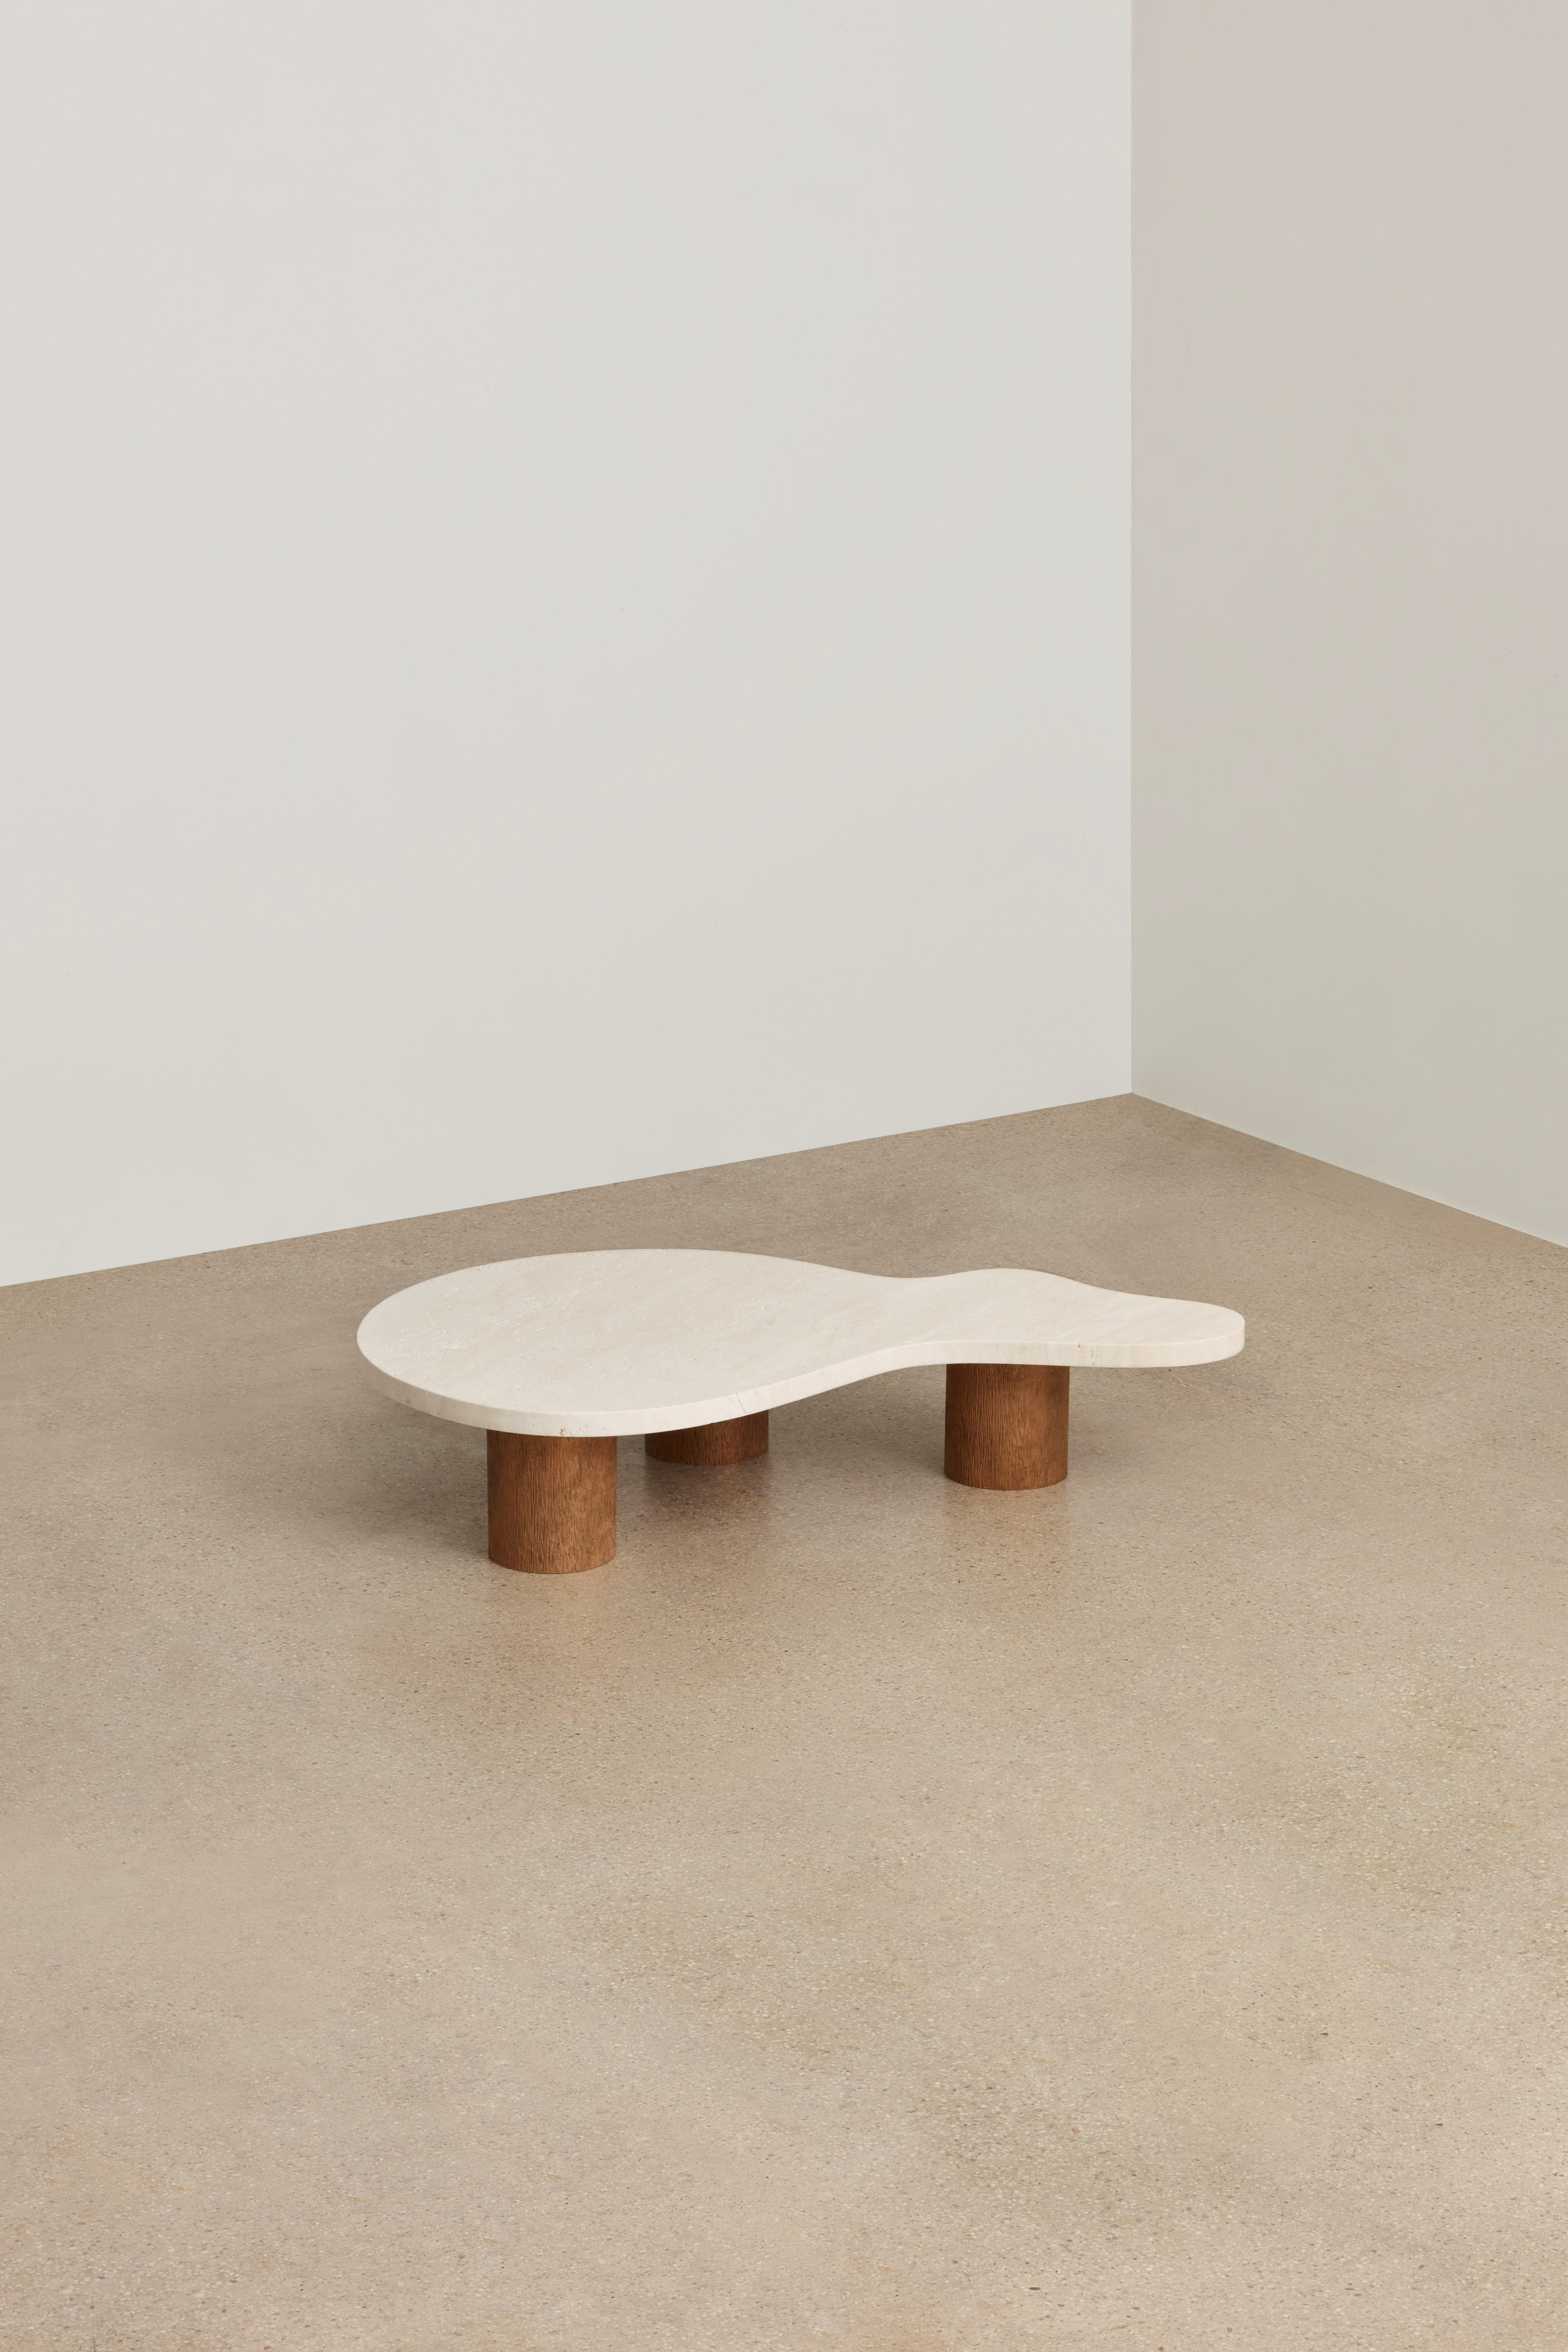 Luca coffee table small by Umberto Bellardi Ricci
Dimensions: W 71.1 x D 109.24 x H 22.9 cm
Materials: Travertine, bronze legs.

Umberto Bellardi Ricci is an Italian sculptor and architect based in New York City, practicing across London,